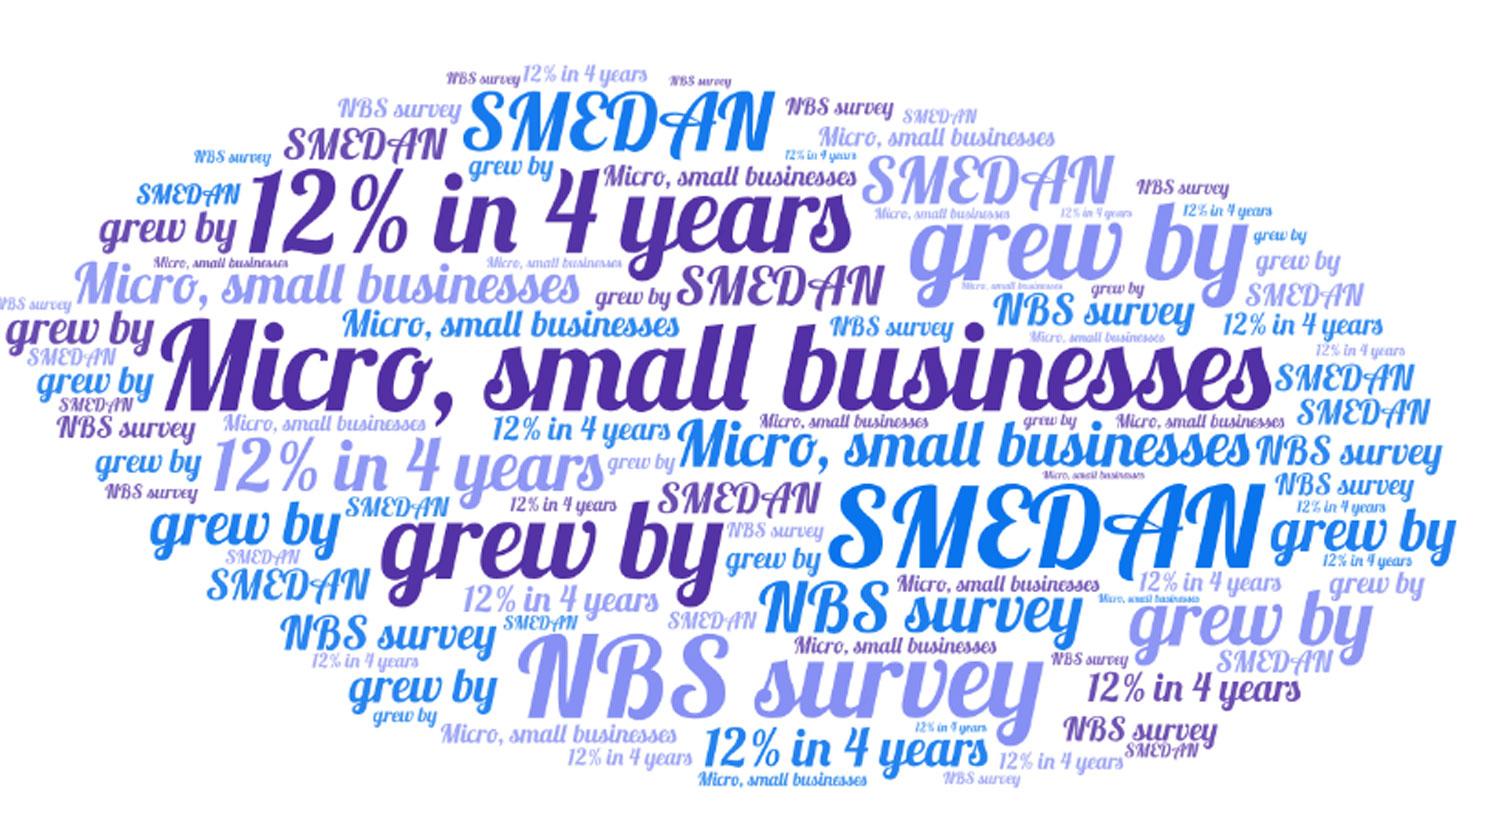 Micro, small businesses grew by 12% in 4 years  — SMEDAN, NBS survey